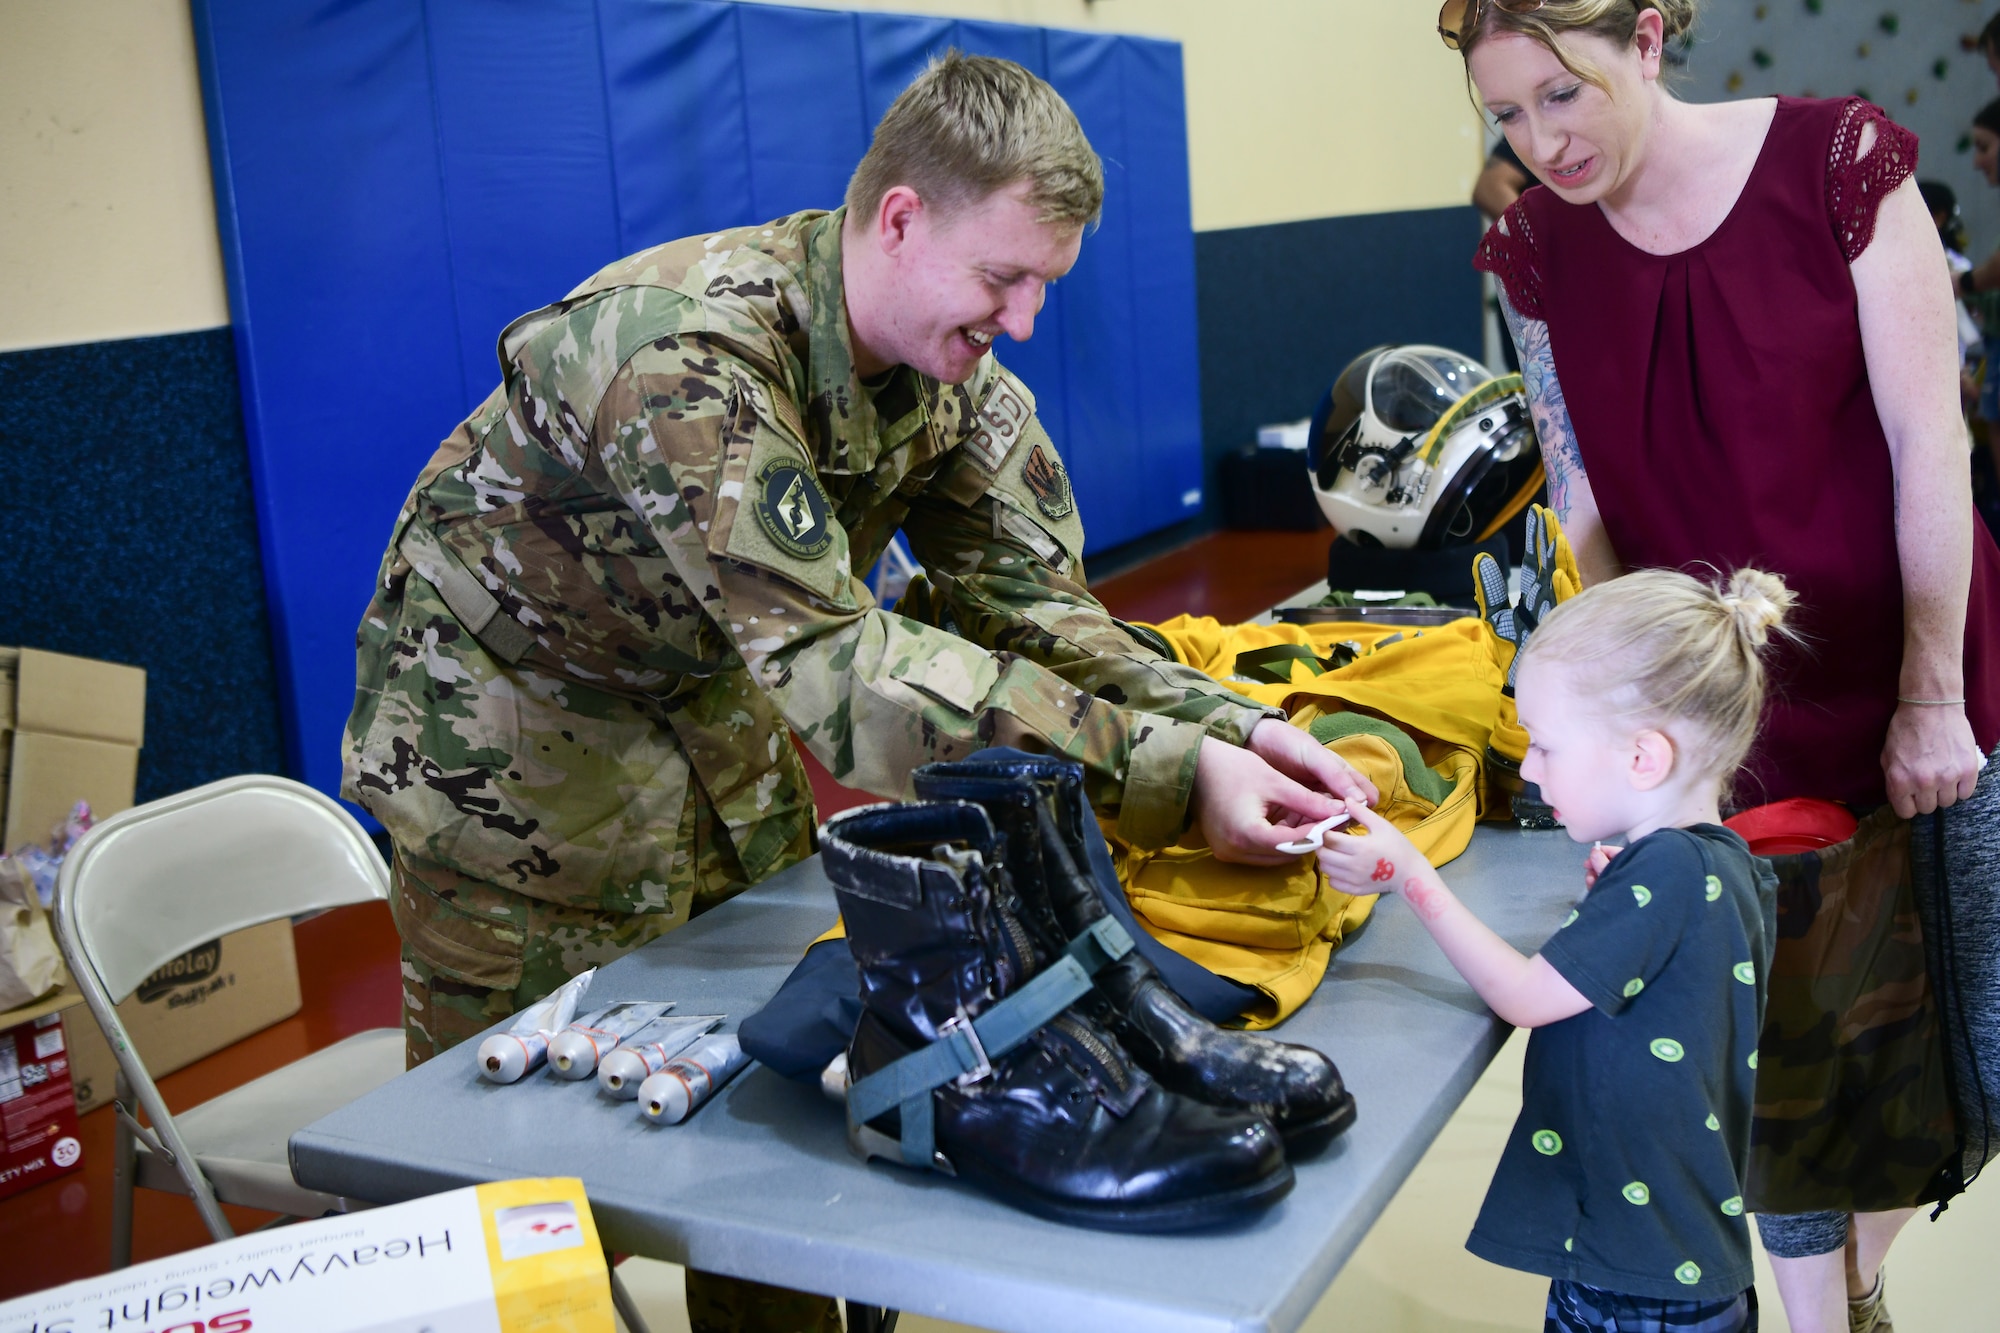 U.S. Air Force Airman 1st Class Adam Dzekunskas, 9th Physiological Support Squadron technician, hands out samples of tube food during the Day for Kids event at the Youth Center on Beale Air Force Base, California, April 21, 2023